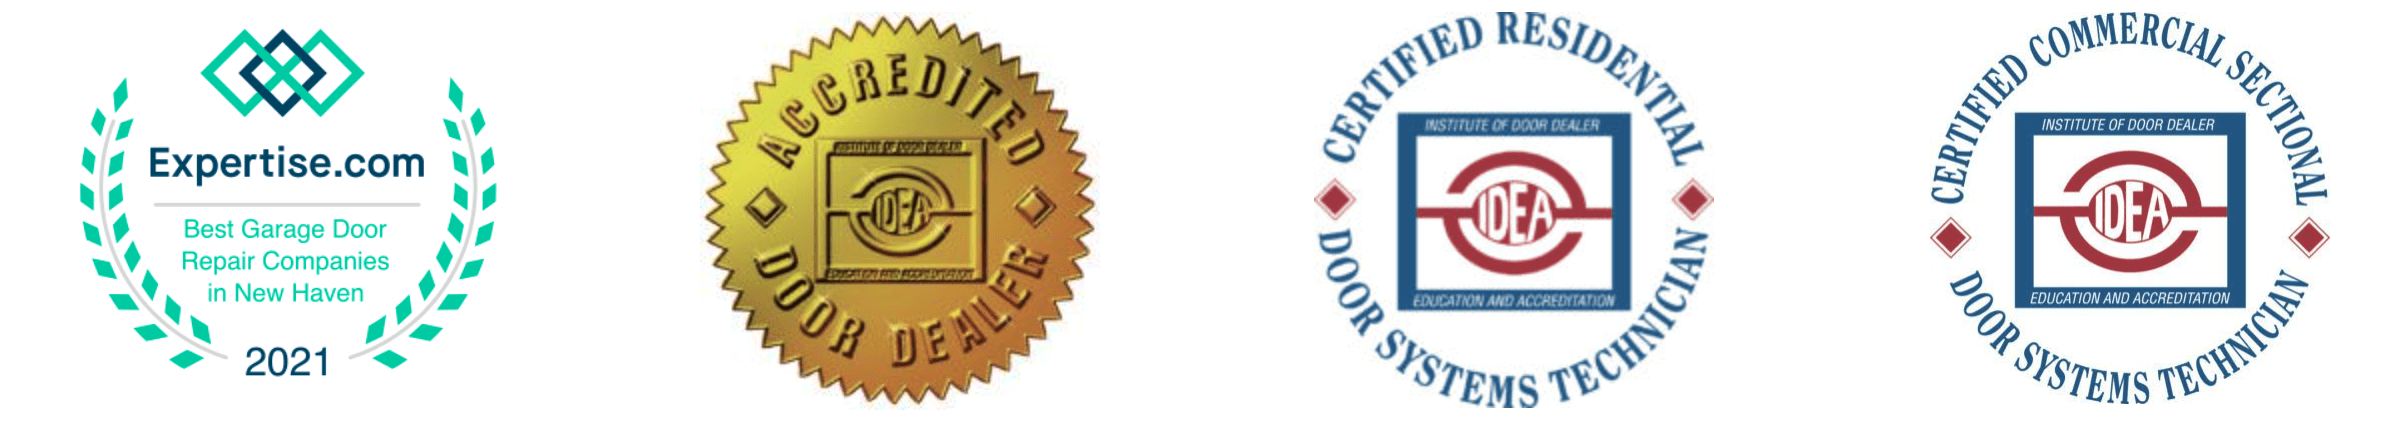 badges and certifications